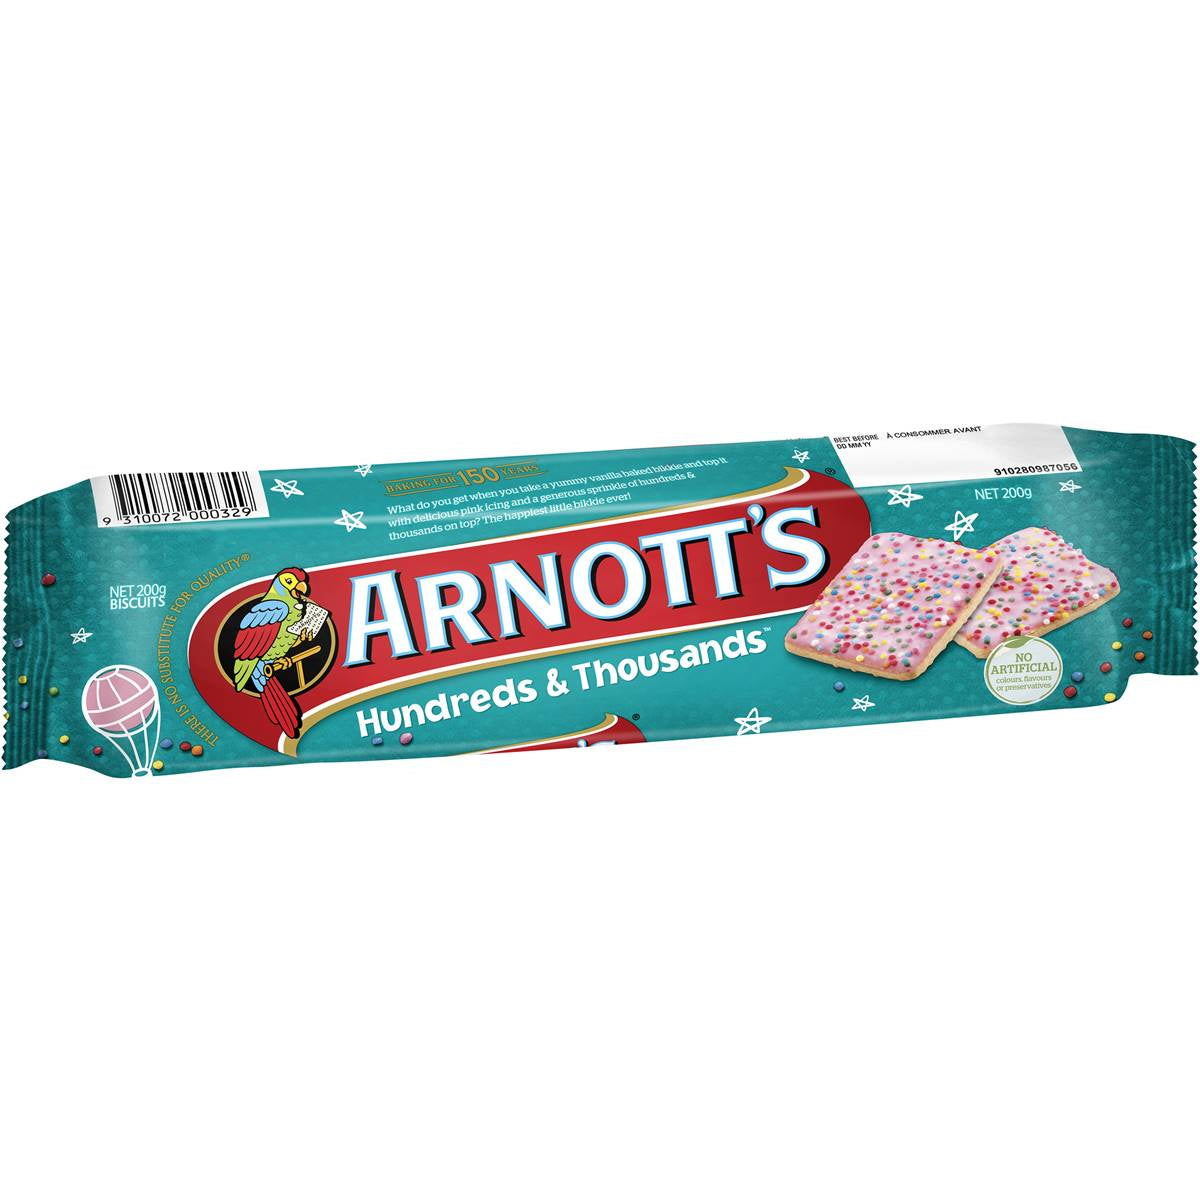 Arnotts Hundreds and Thousand Biscuits 200G